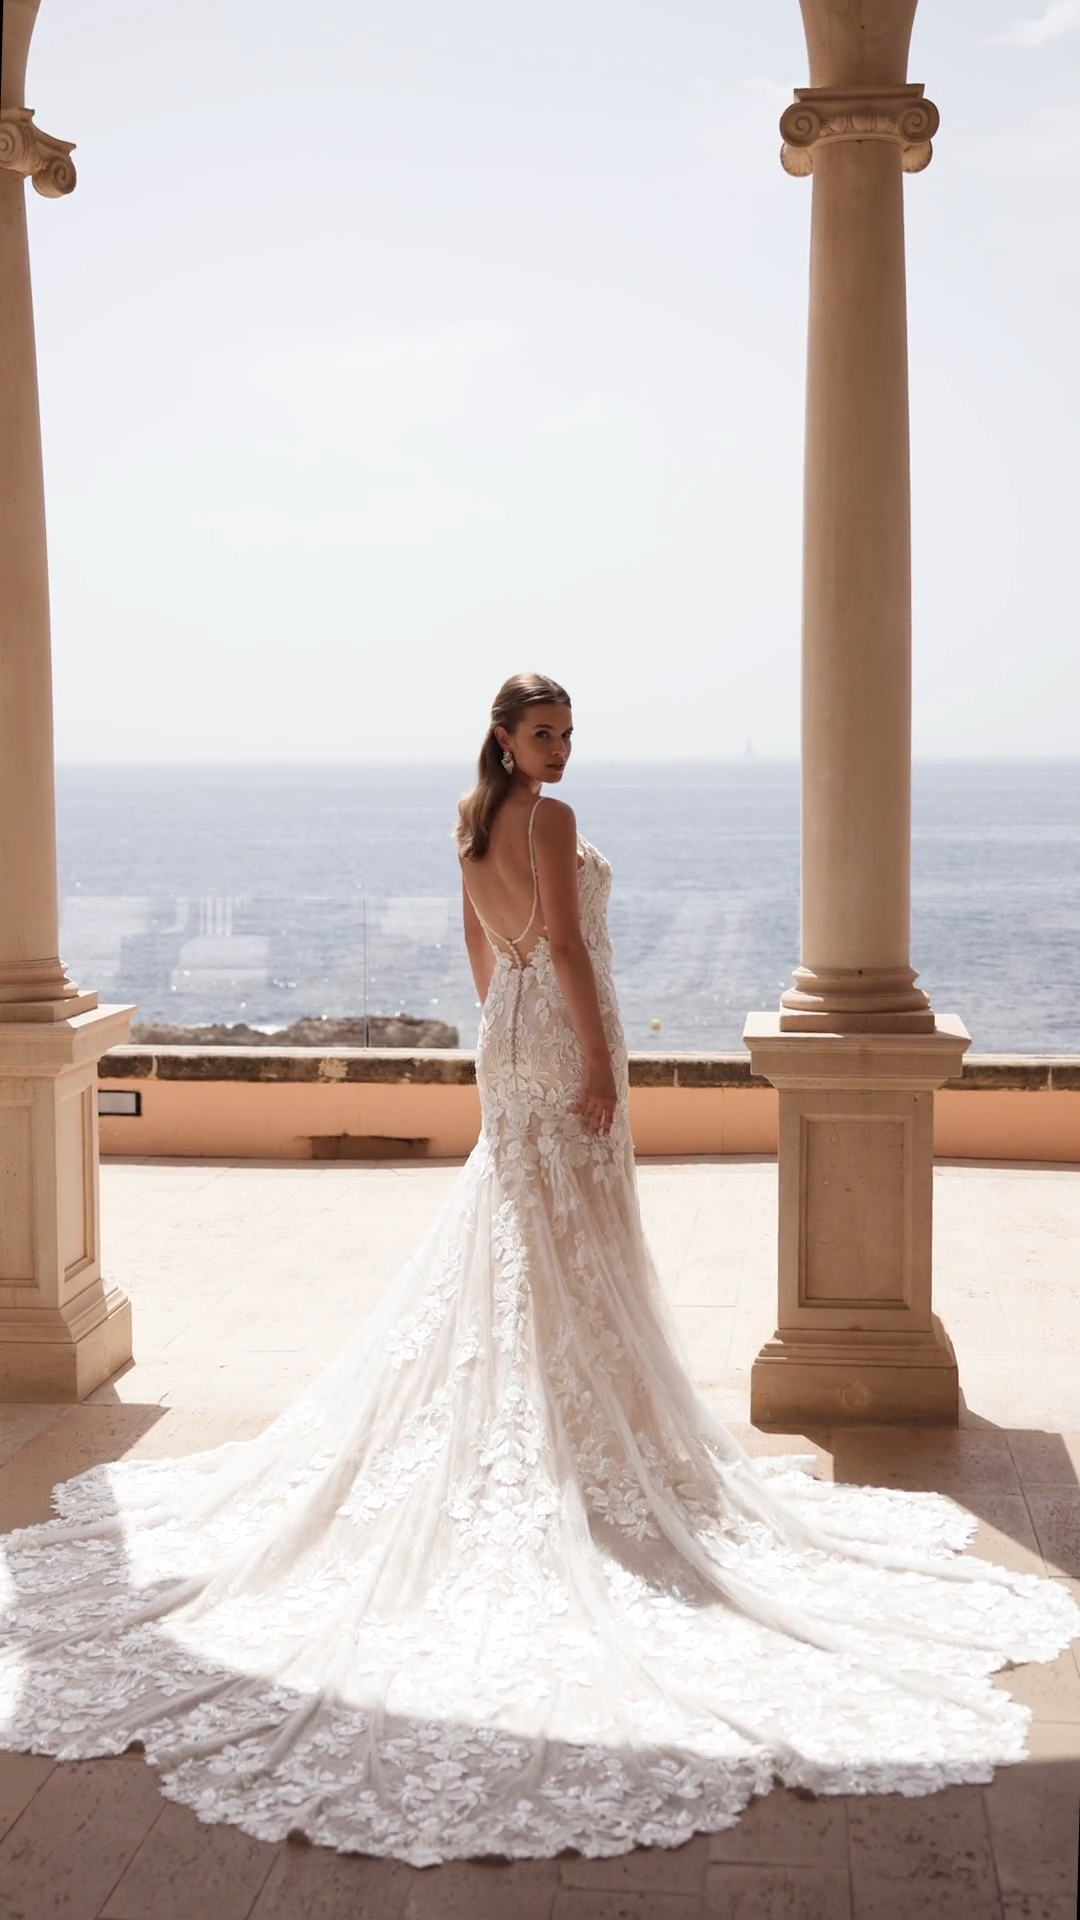 Chantilly Lace Mermaid Olivia Wedding Dress with Cape